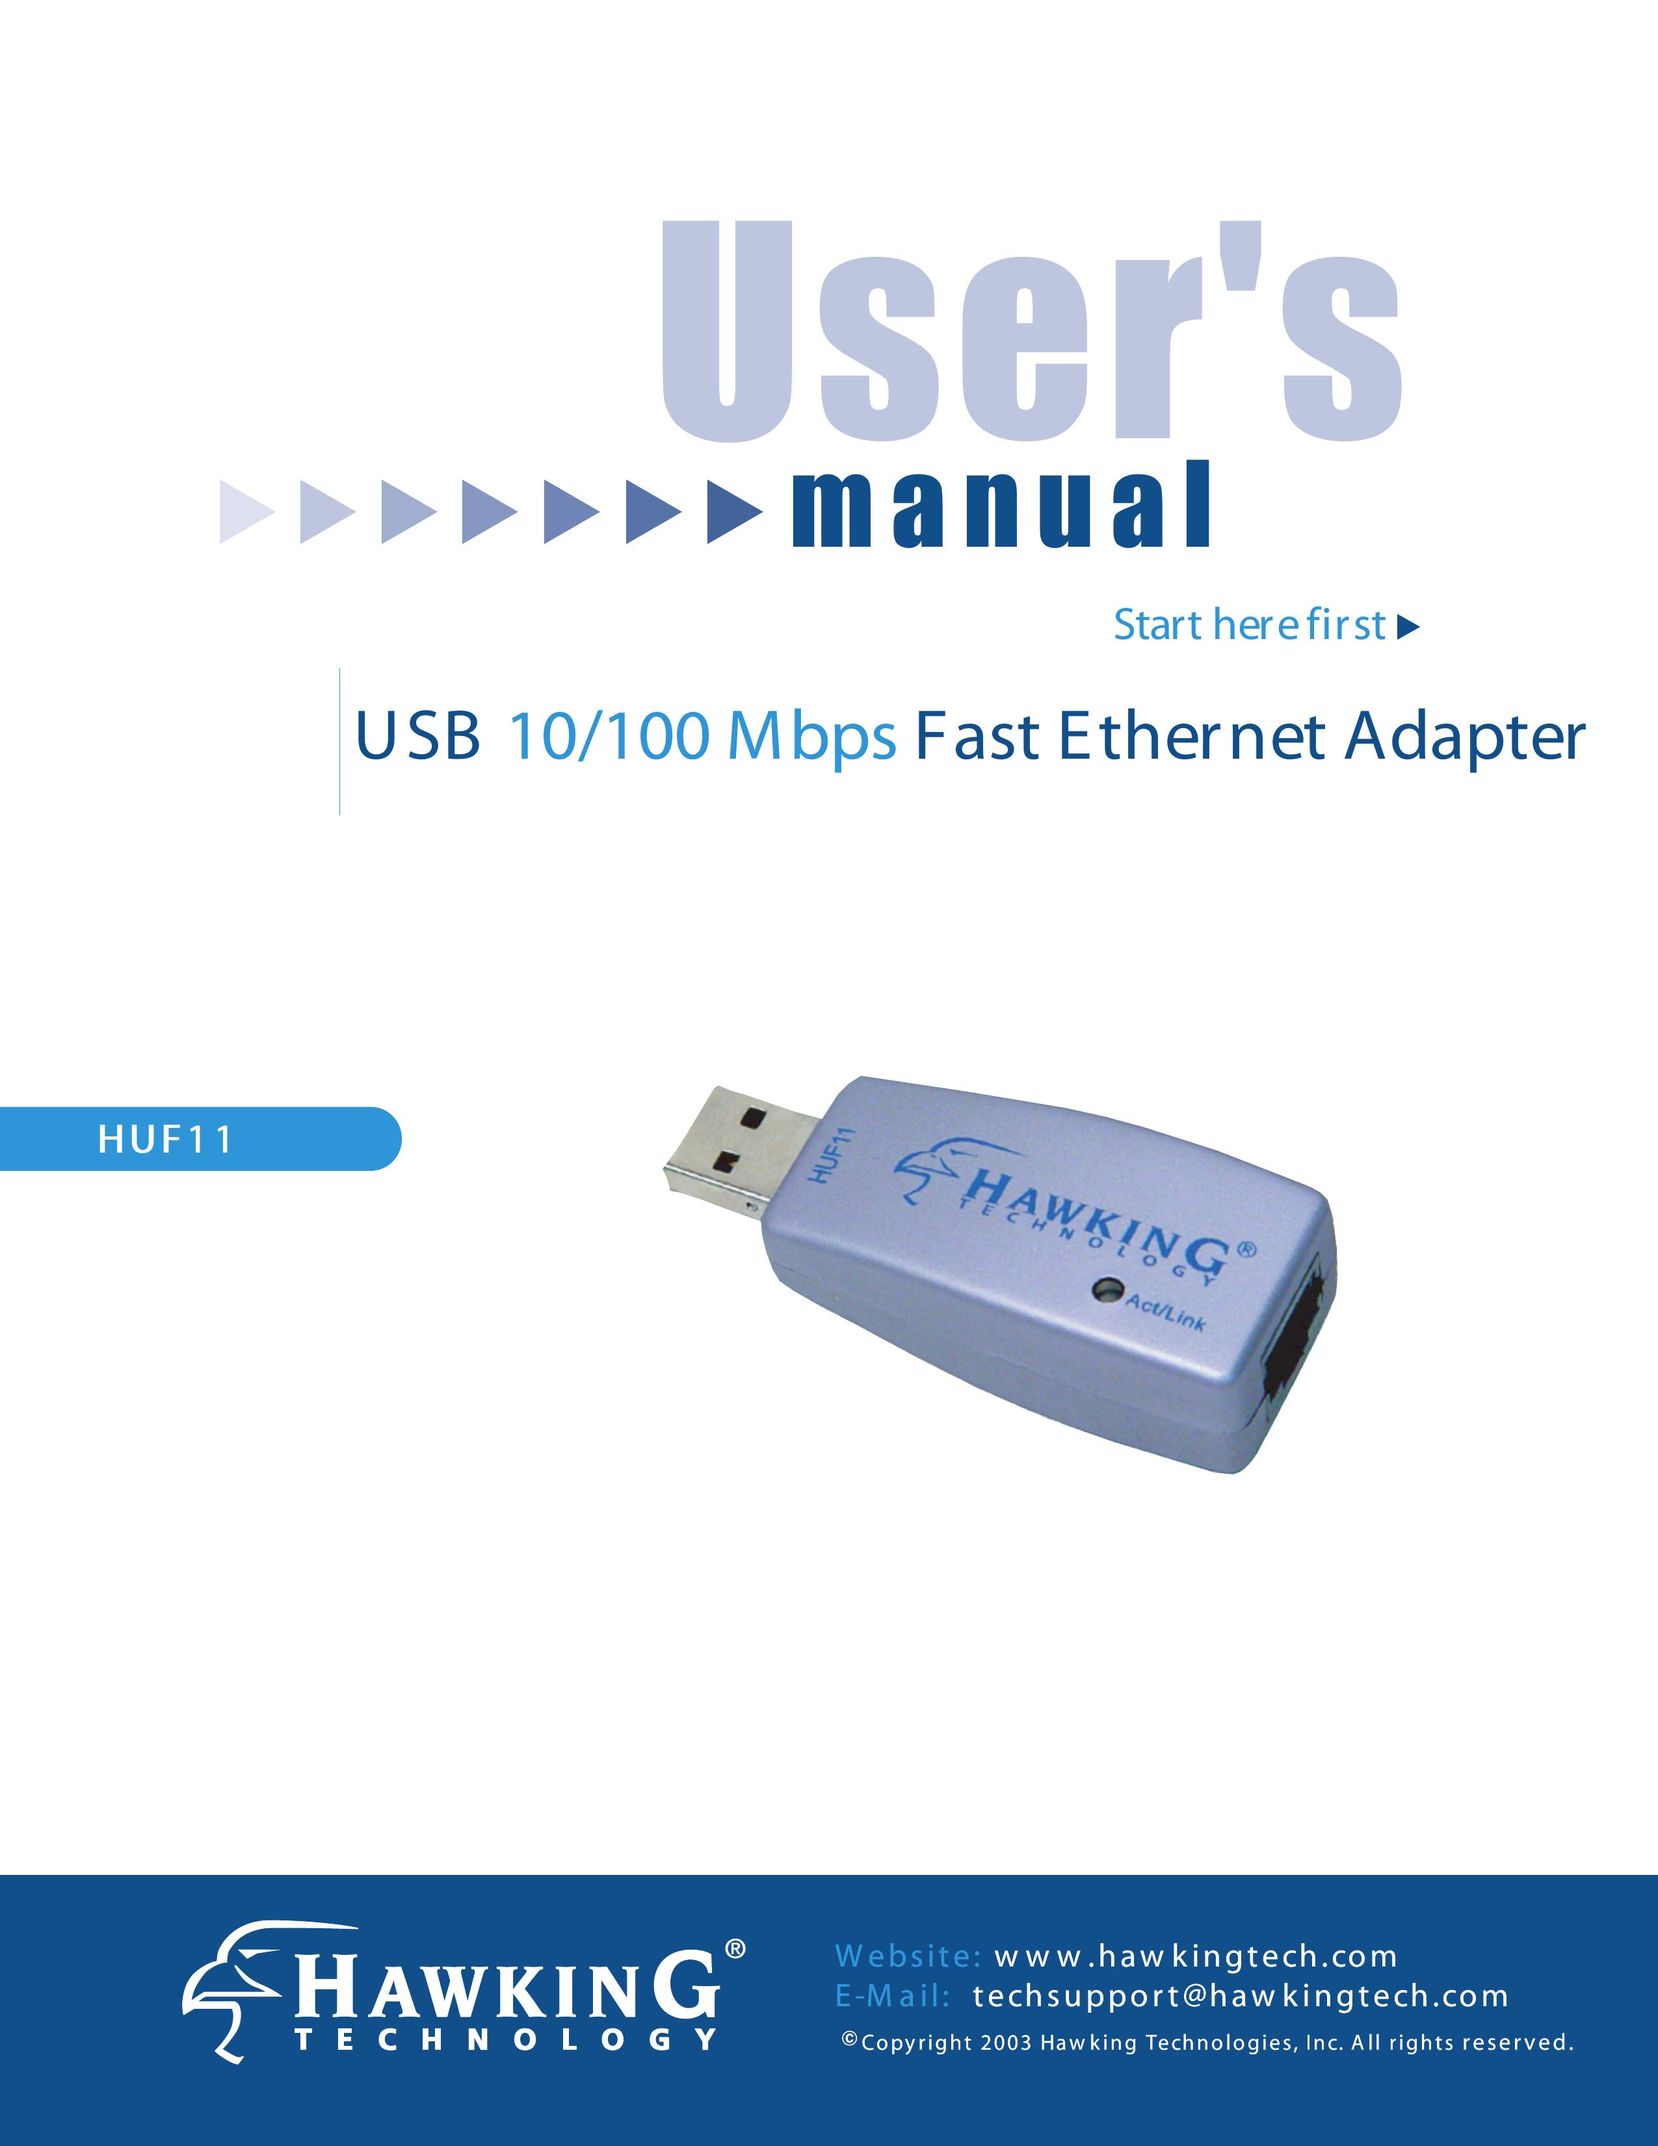 Hawking Technology USB 10/100 Mbps Network Card User Manual